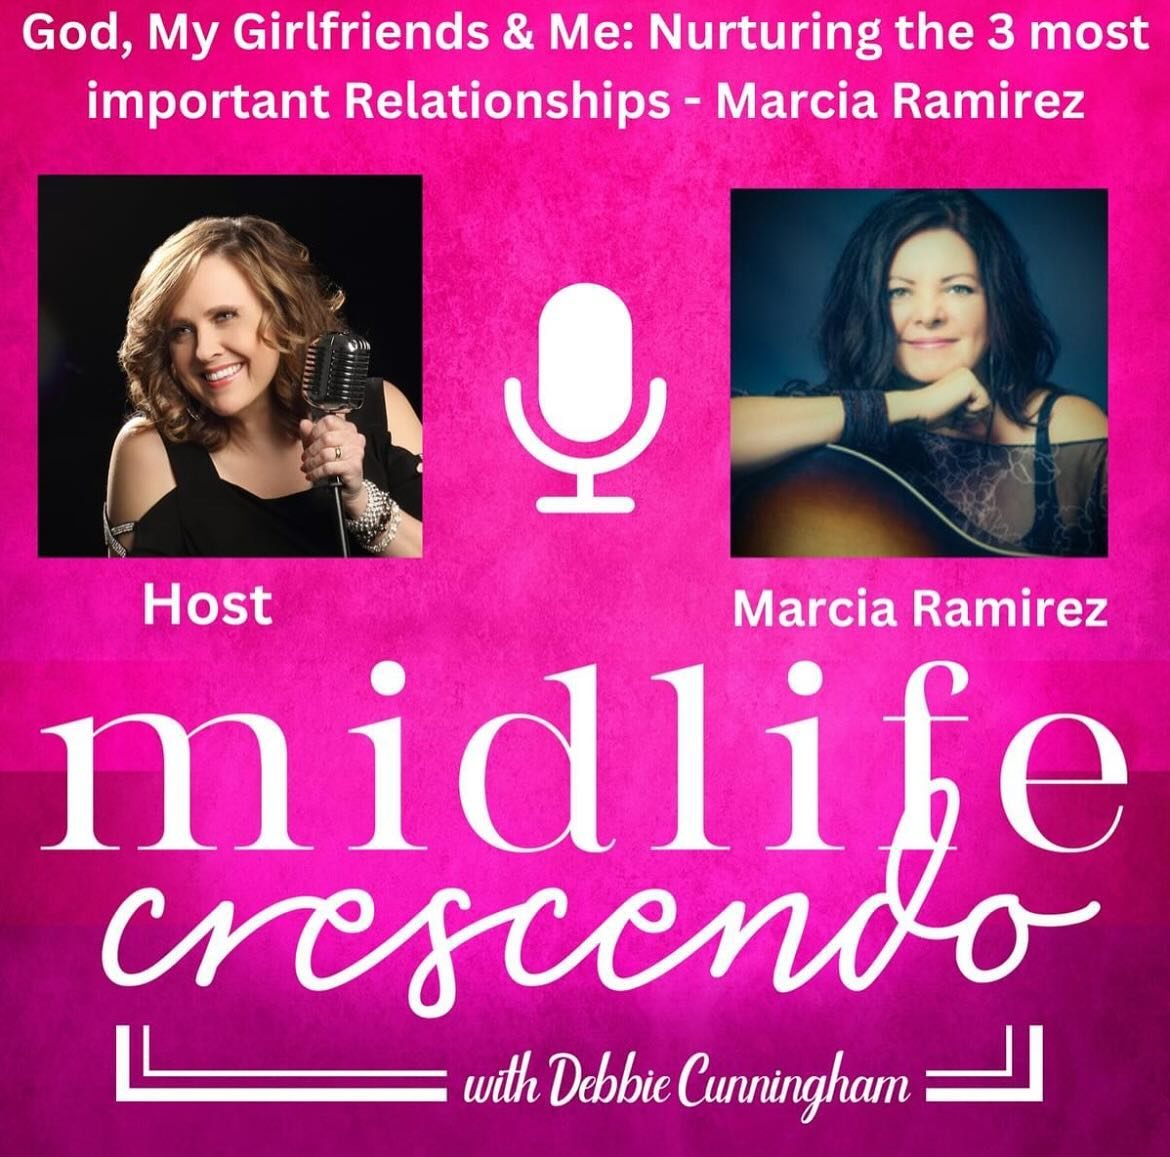 Part 2 of my conversation with @debbiecunninghamofficial on her podcast @midlifecrescendo is out today! Check it out wherever you listen to podcasts.